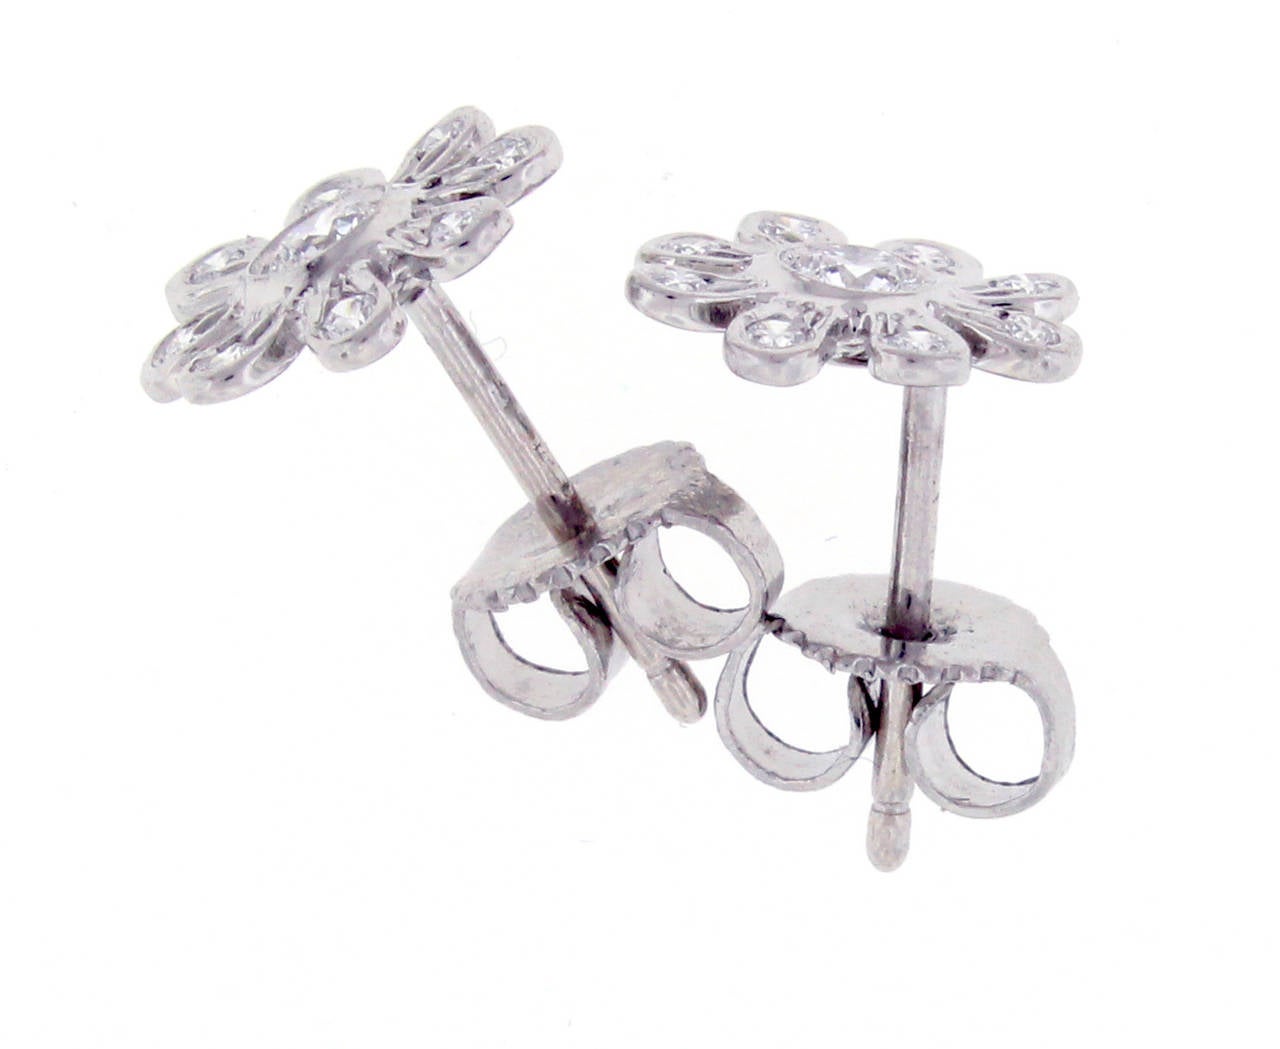 Delicate  diamond flower earrings by Tiffany & Co, 18 diamonds weighing.18 carat, set in platinum.